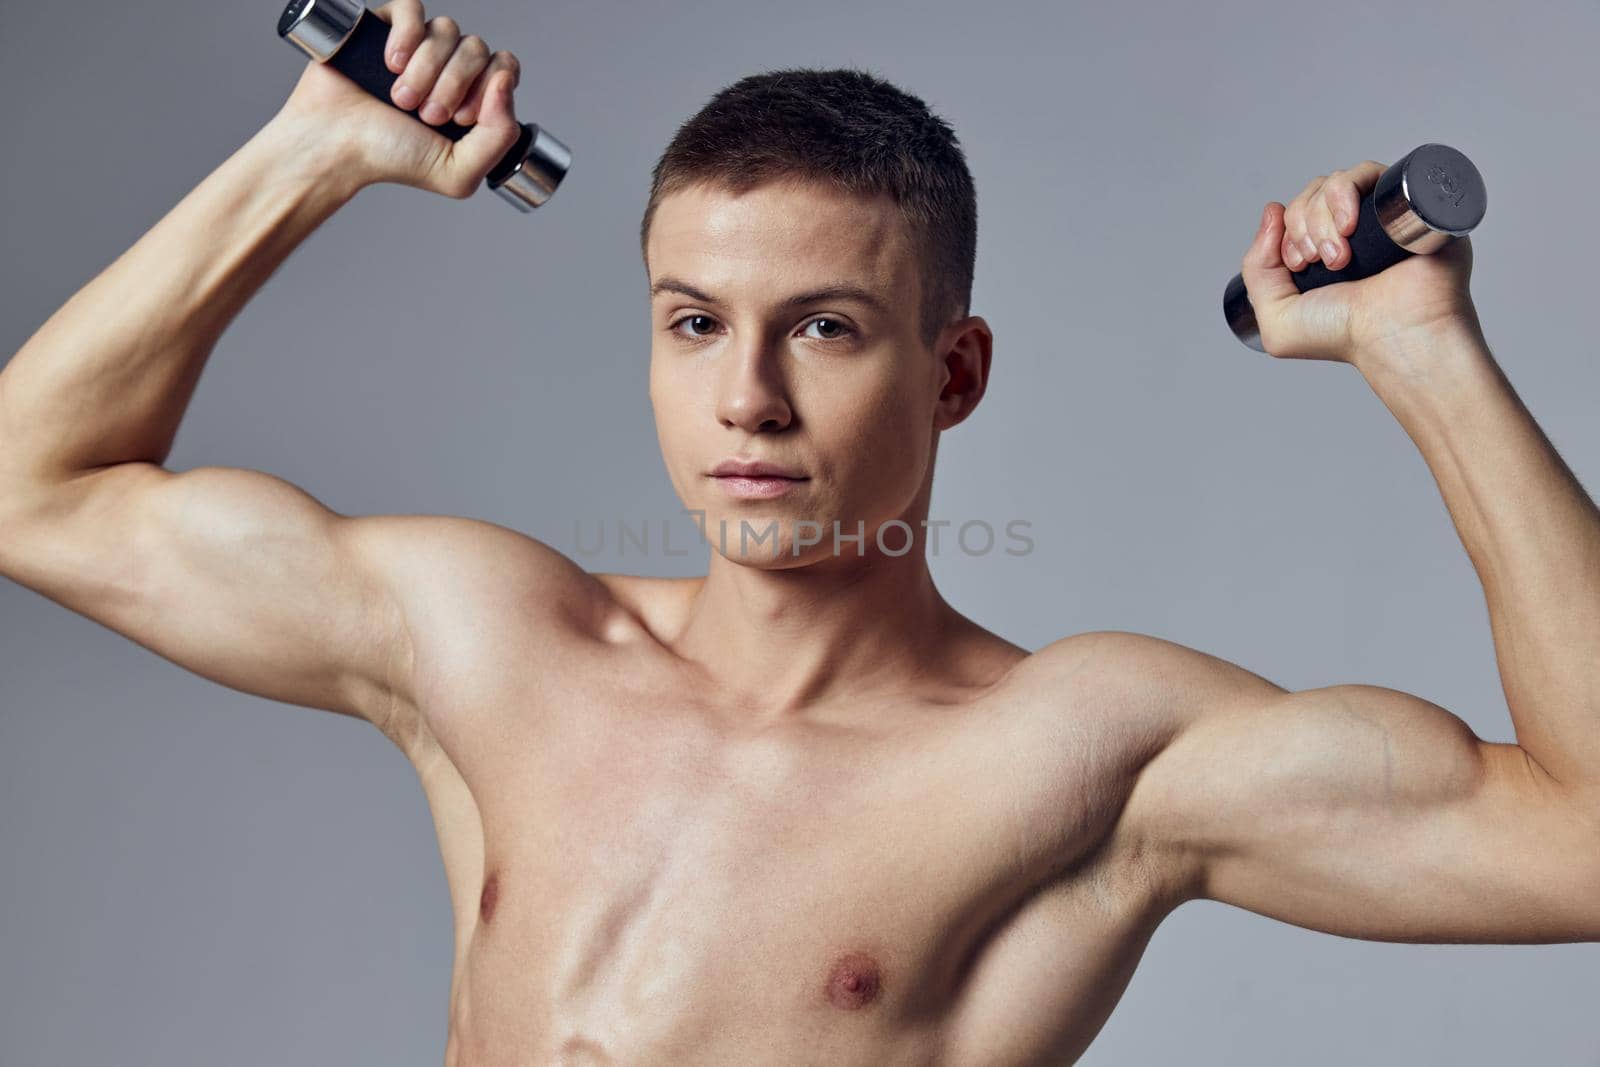 handsome man with a pumped-up body dumbbells in his hands workout muscles. High quality photo